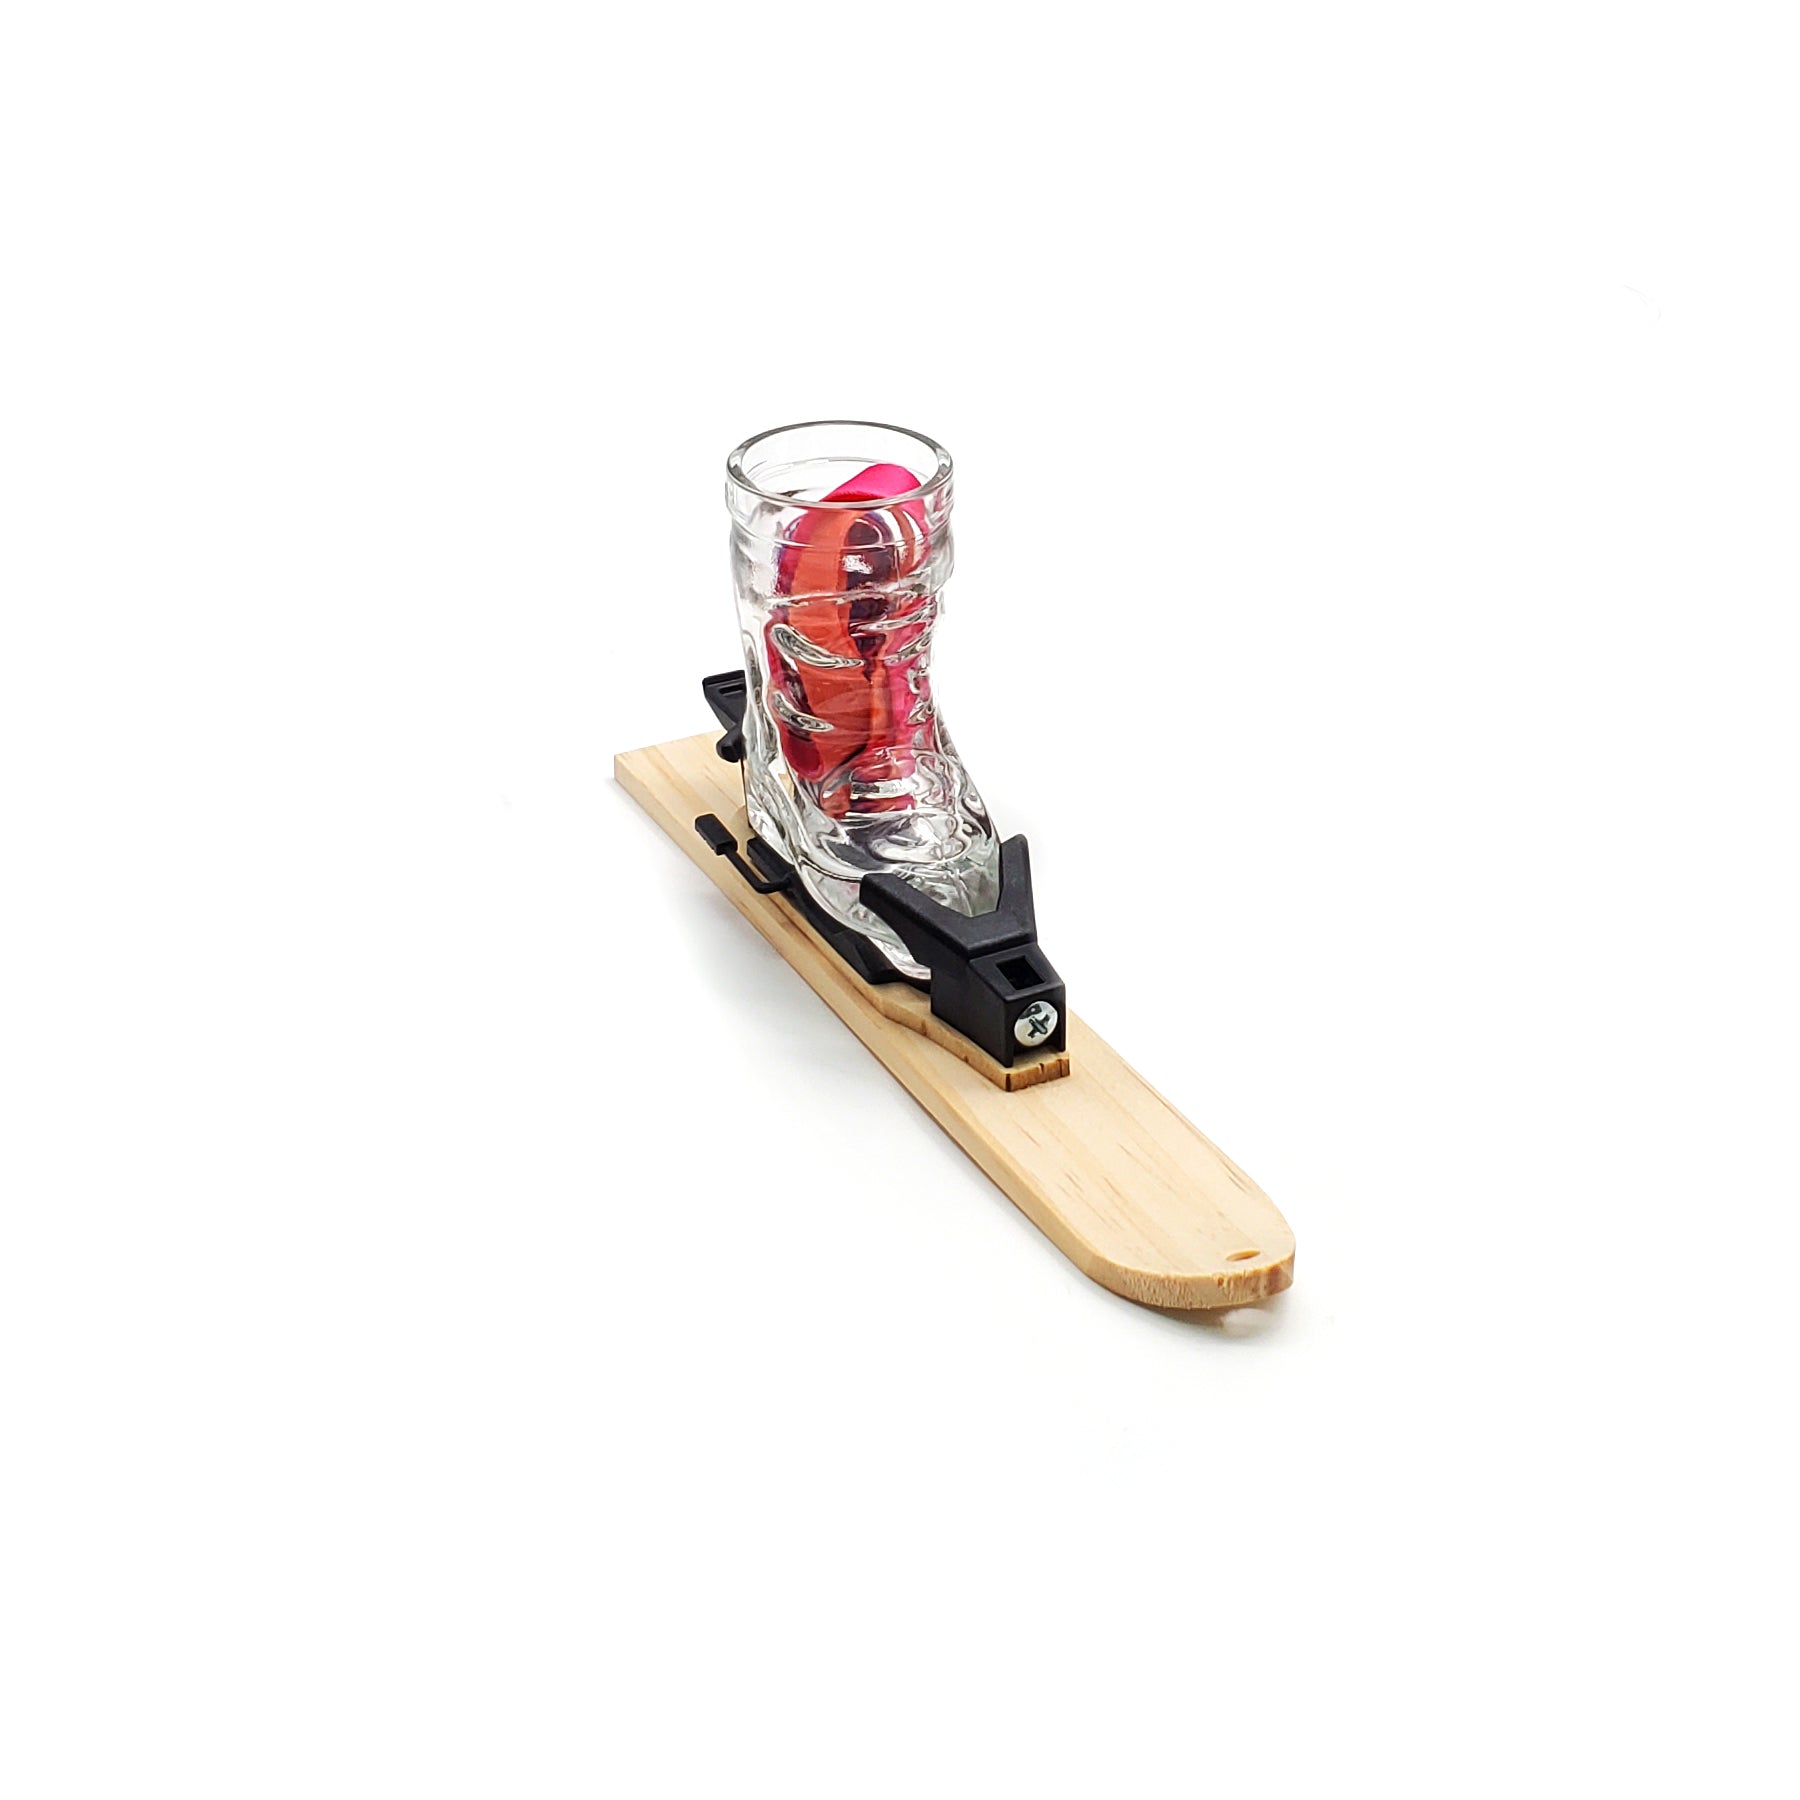 Photo of a wooden tray in the shape of small ski. The ski tray has a hole drilled into the tip of the ski and a small raised mounting platform for the Apr√®s Allstar boot shot glass and bindings.  A red lanyard is sitting inside the glass Image is set against a white backdrop